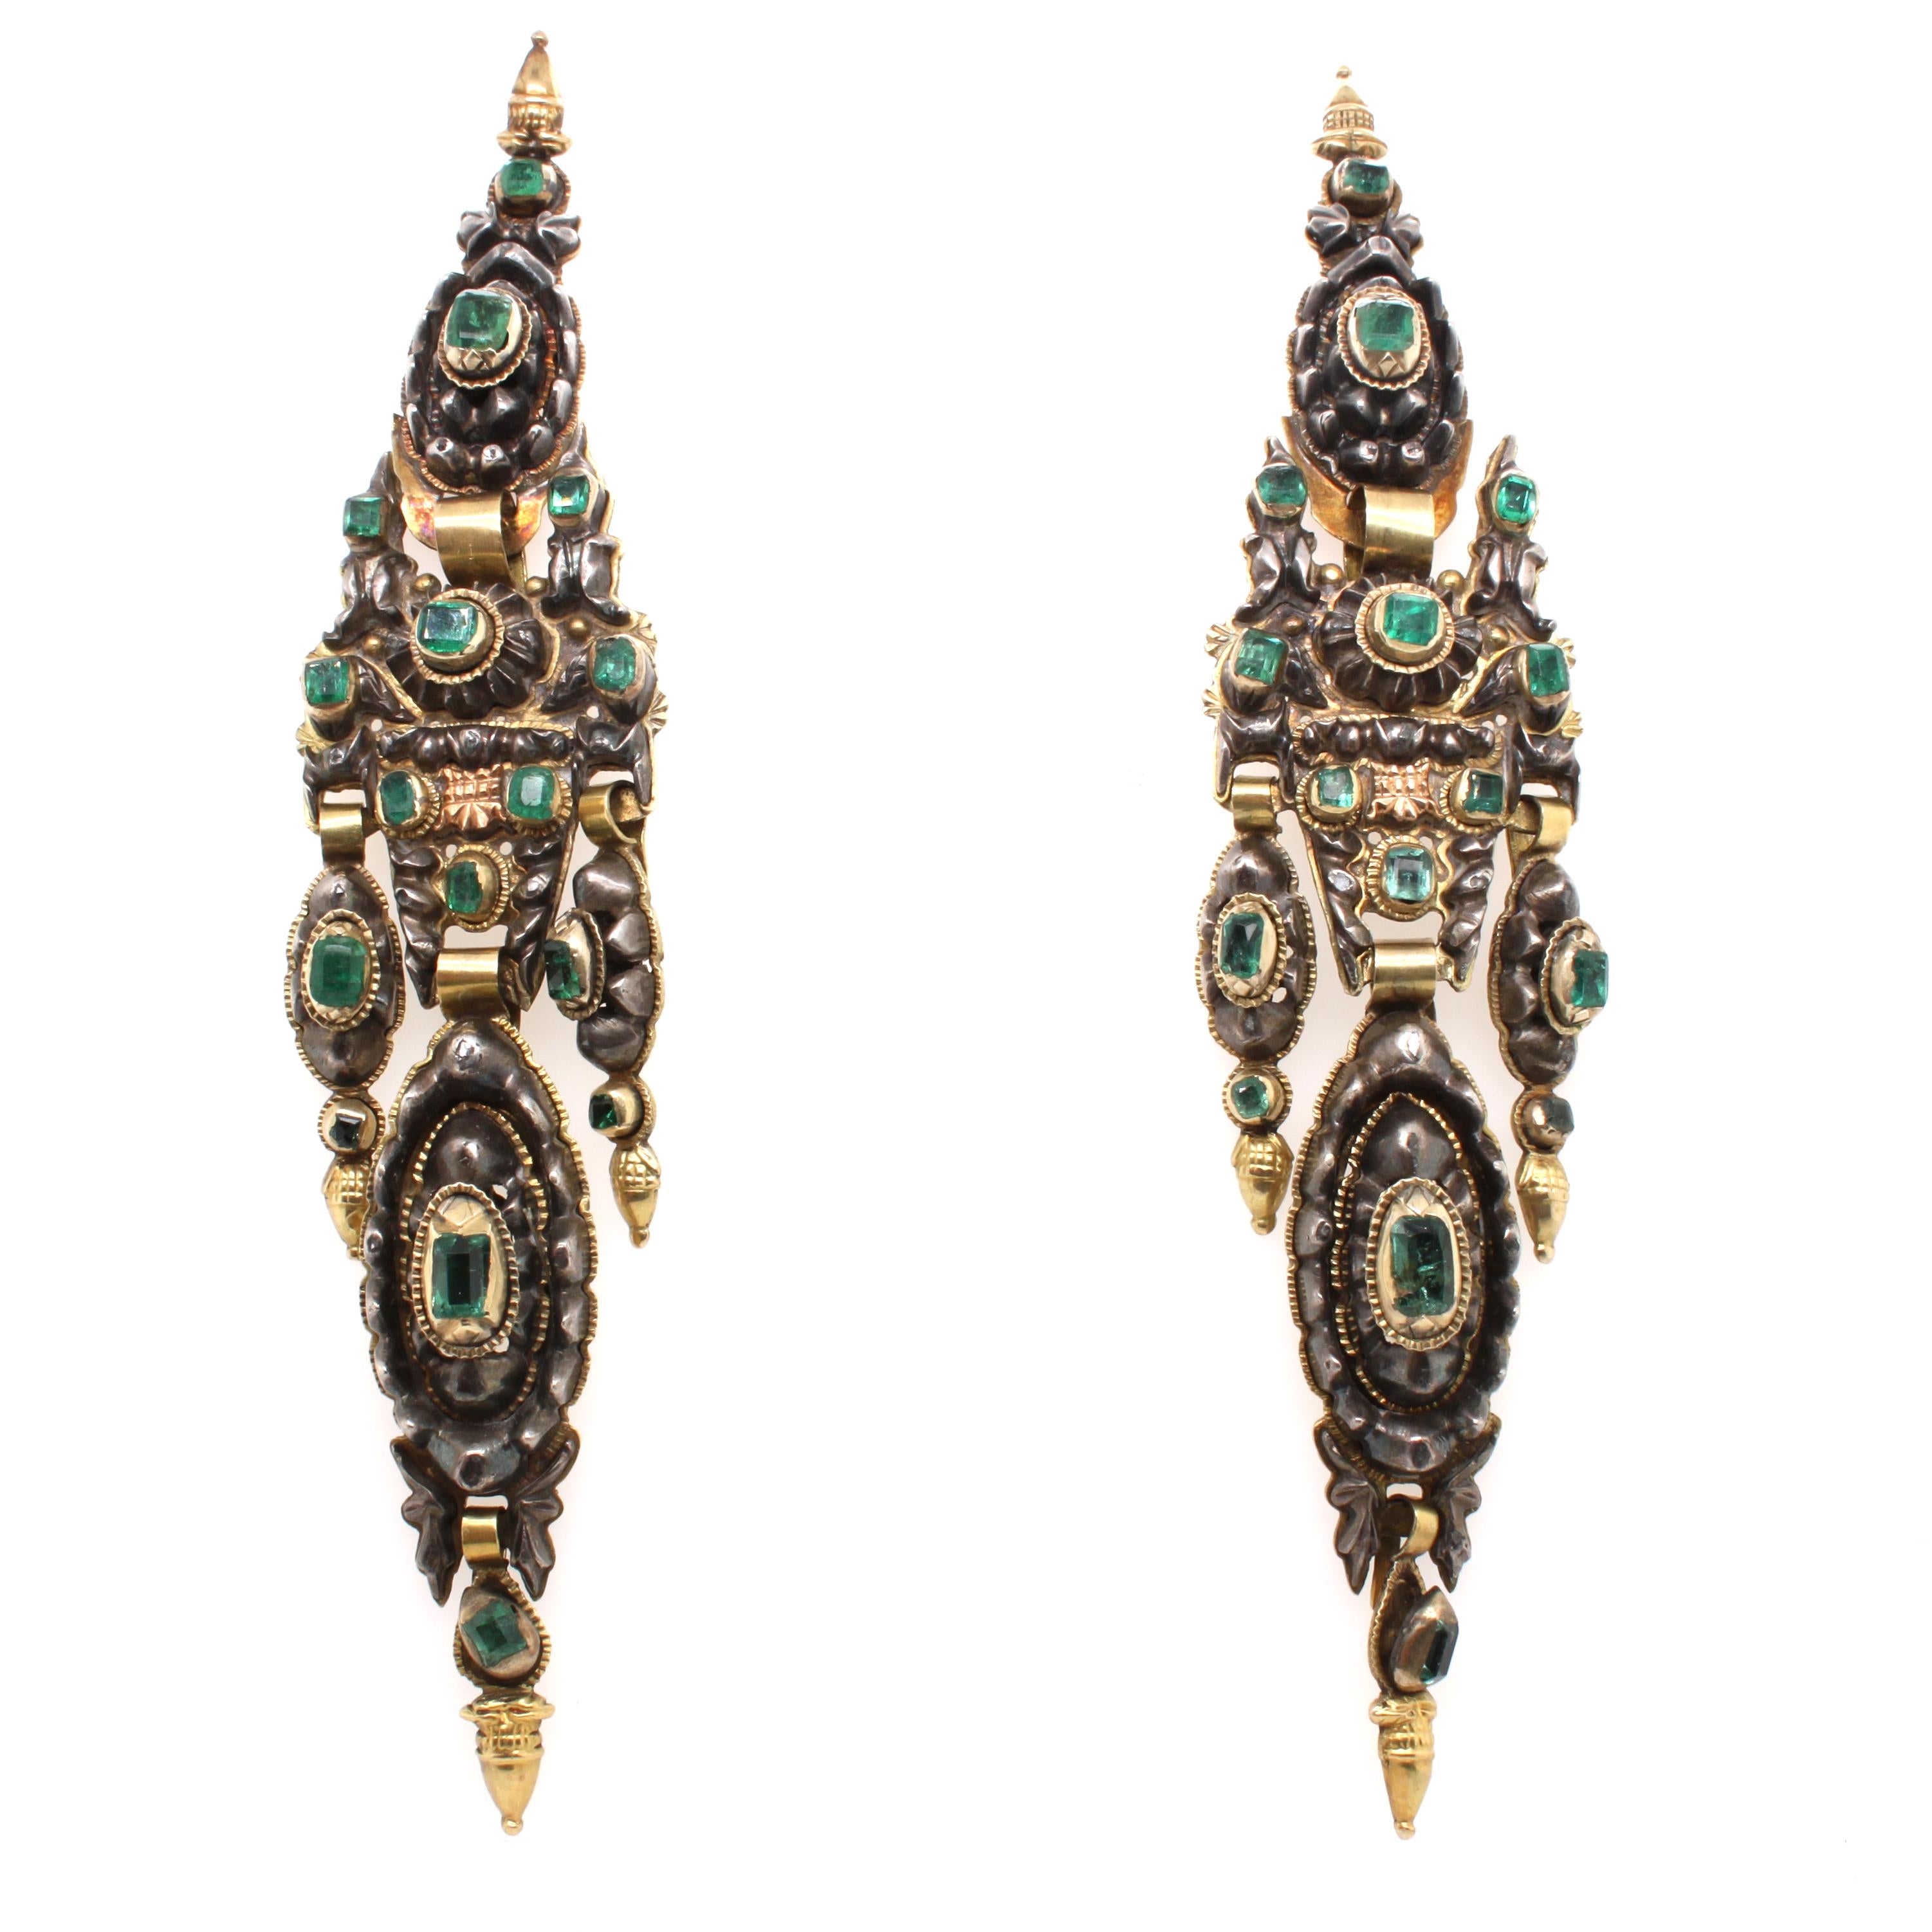 Antique Iberian Emerald Earrings, ca. 18th Century

A rare pair of antique Iberian - Portuguese earrings in yellow gold and silver, studded with Colombian emeralds. The chandelier earrings have several moving links and are of a long length, which